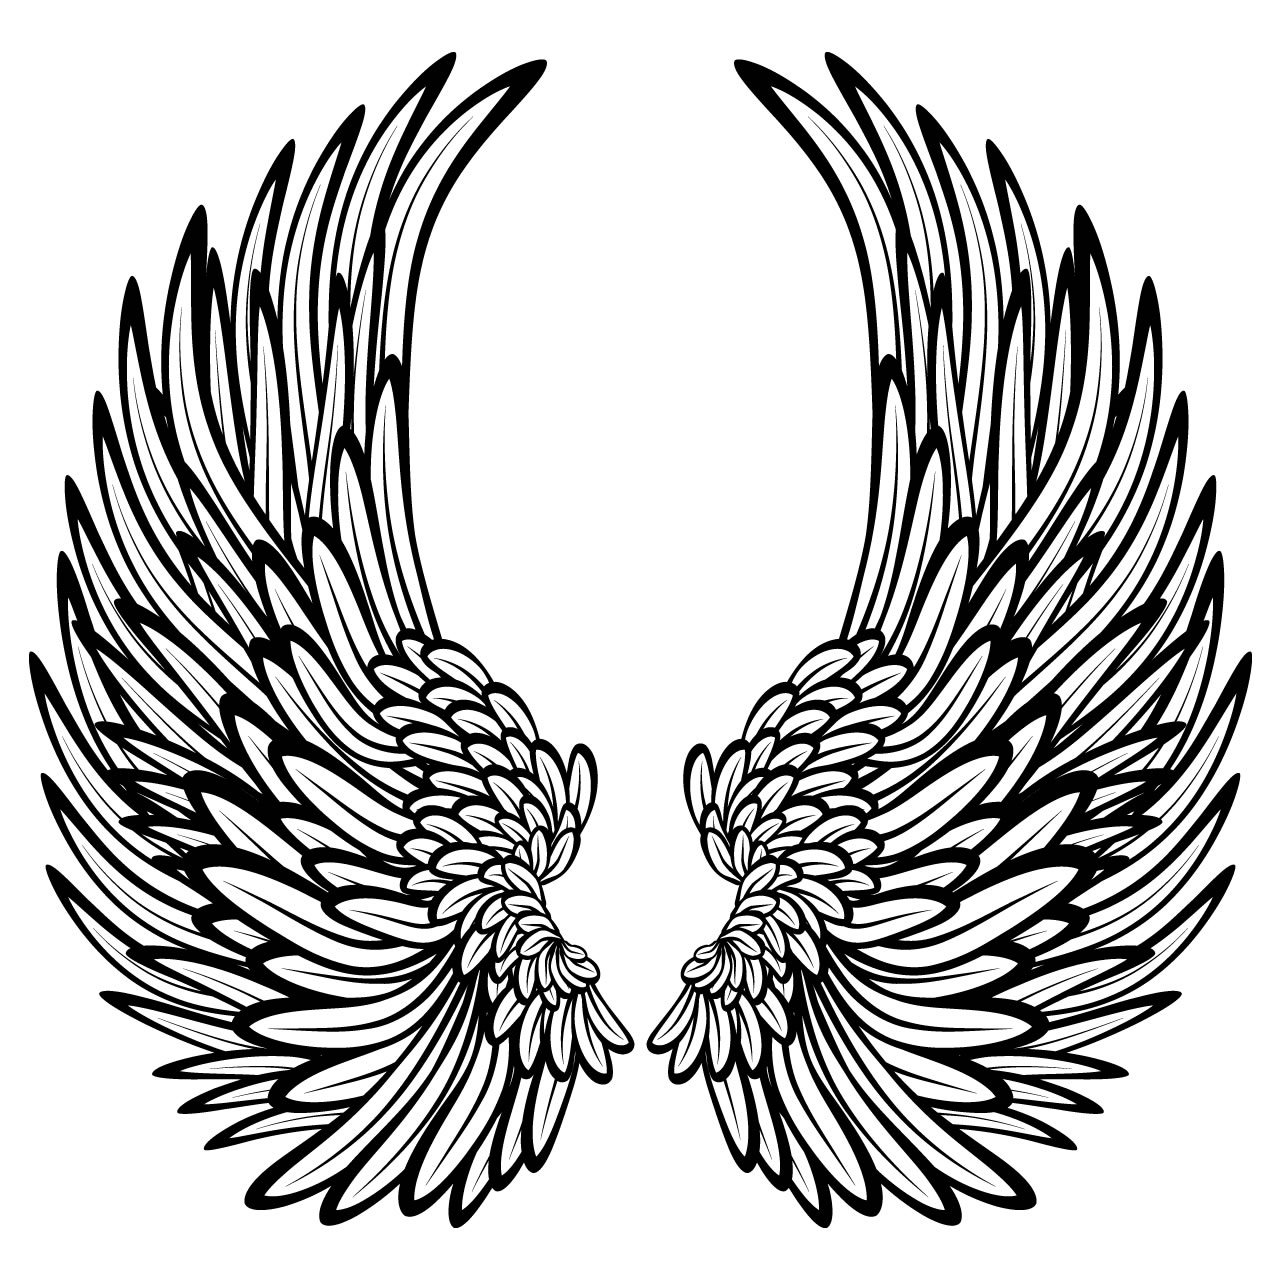 1000+ images about Angel wings